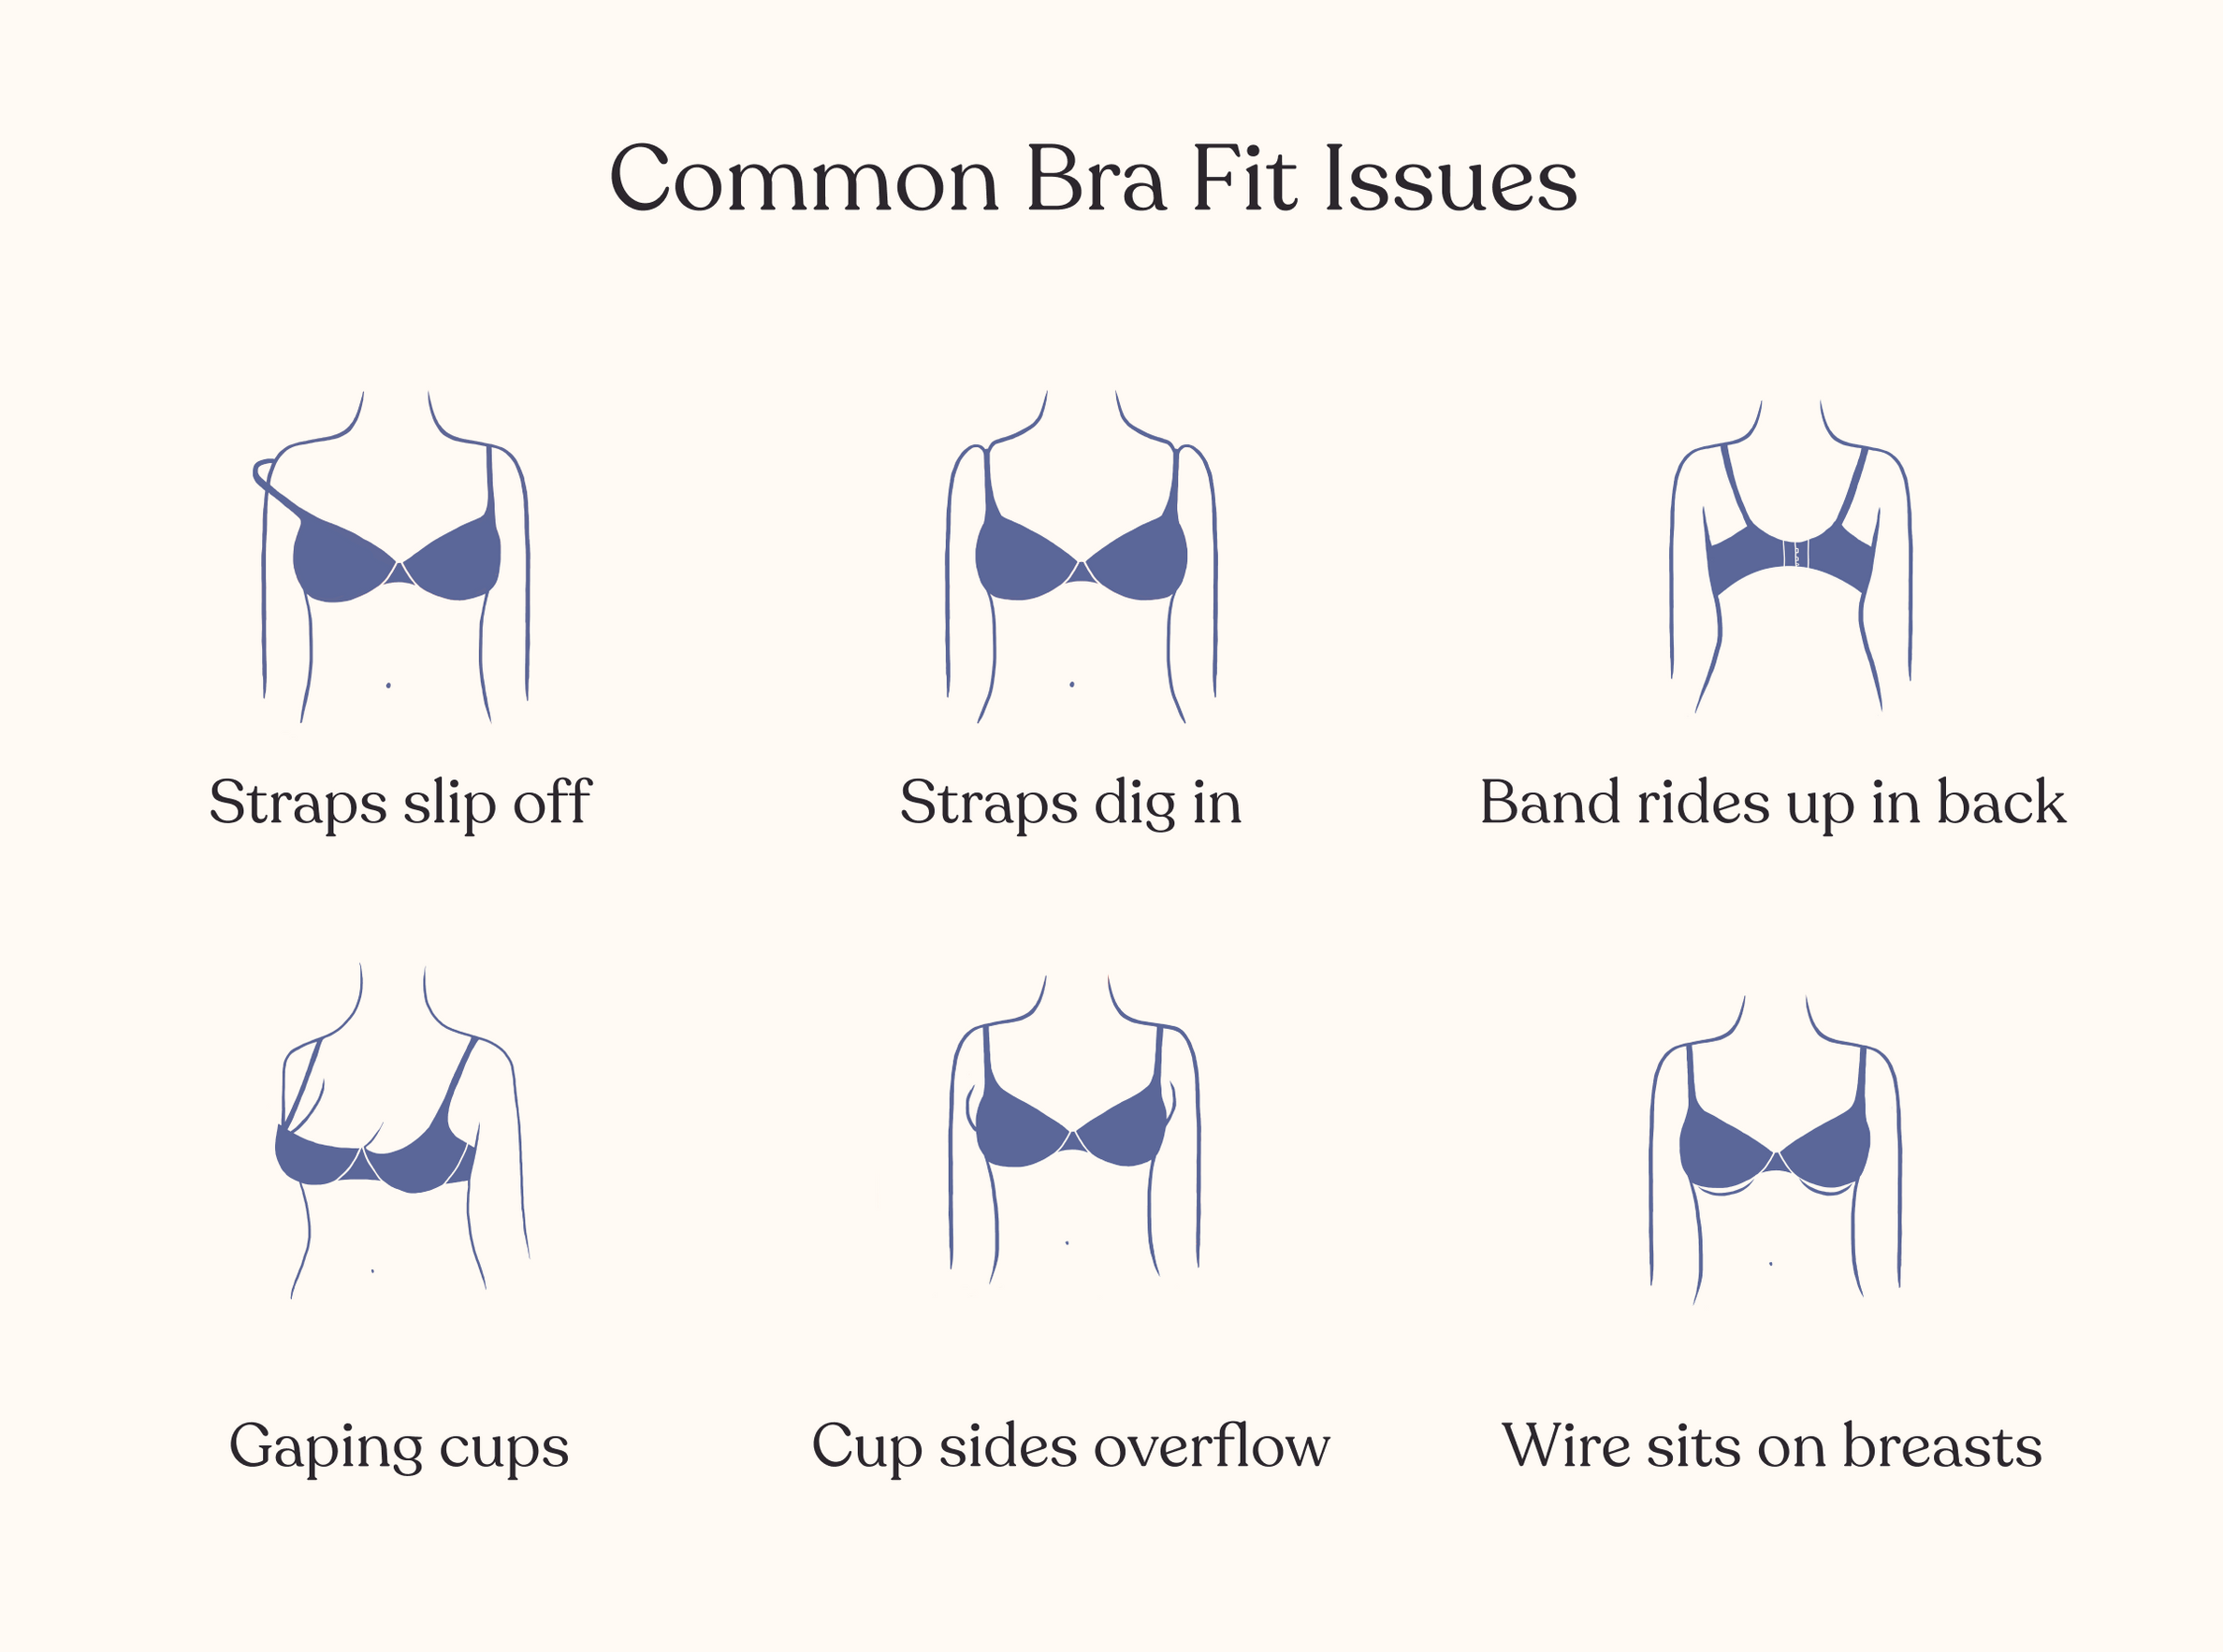 Common bra fit issues.